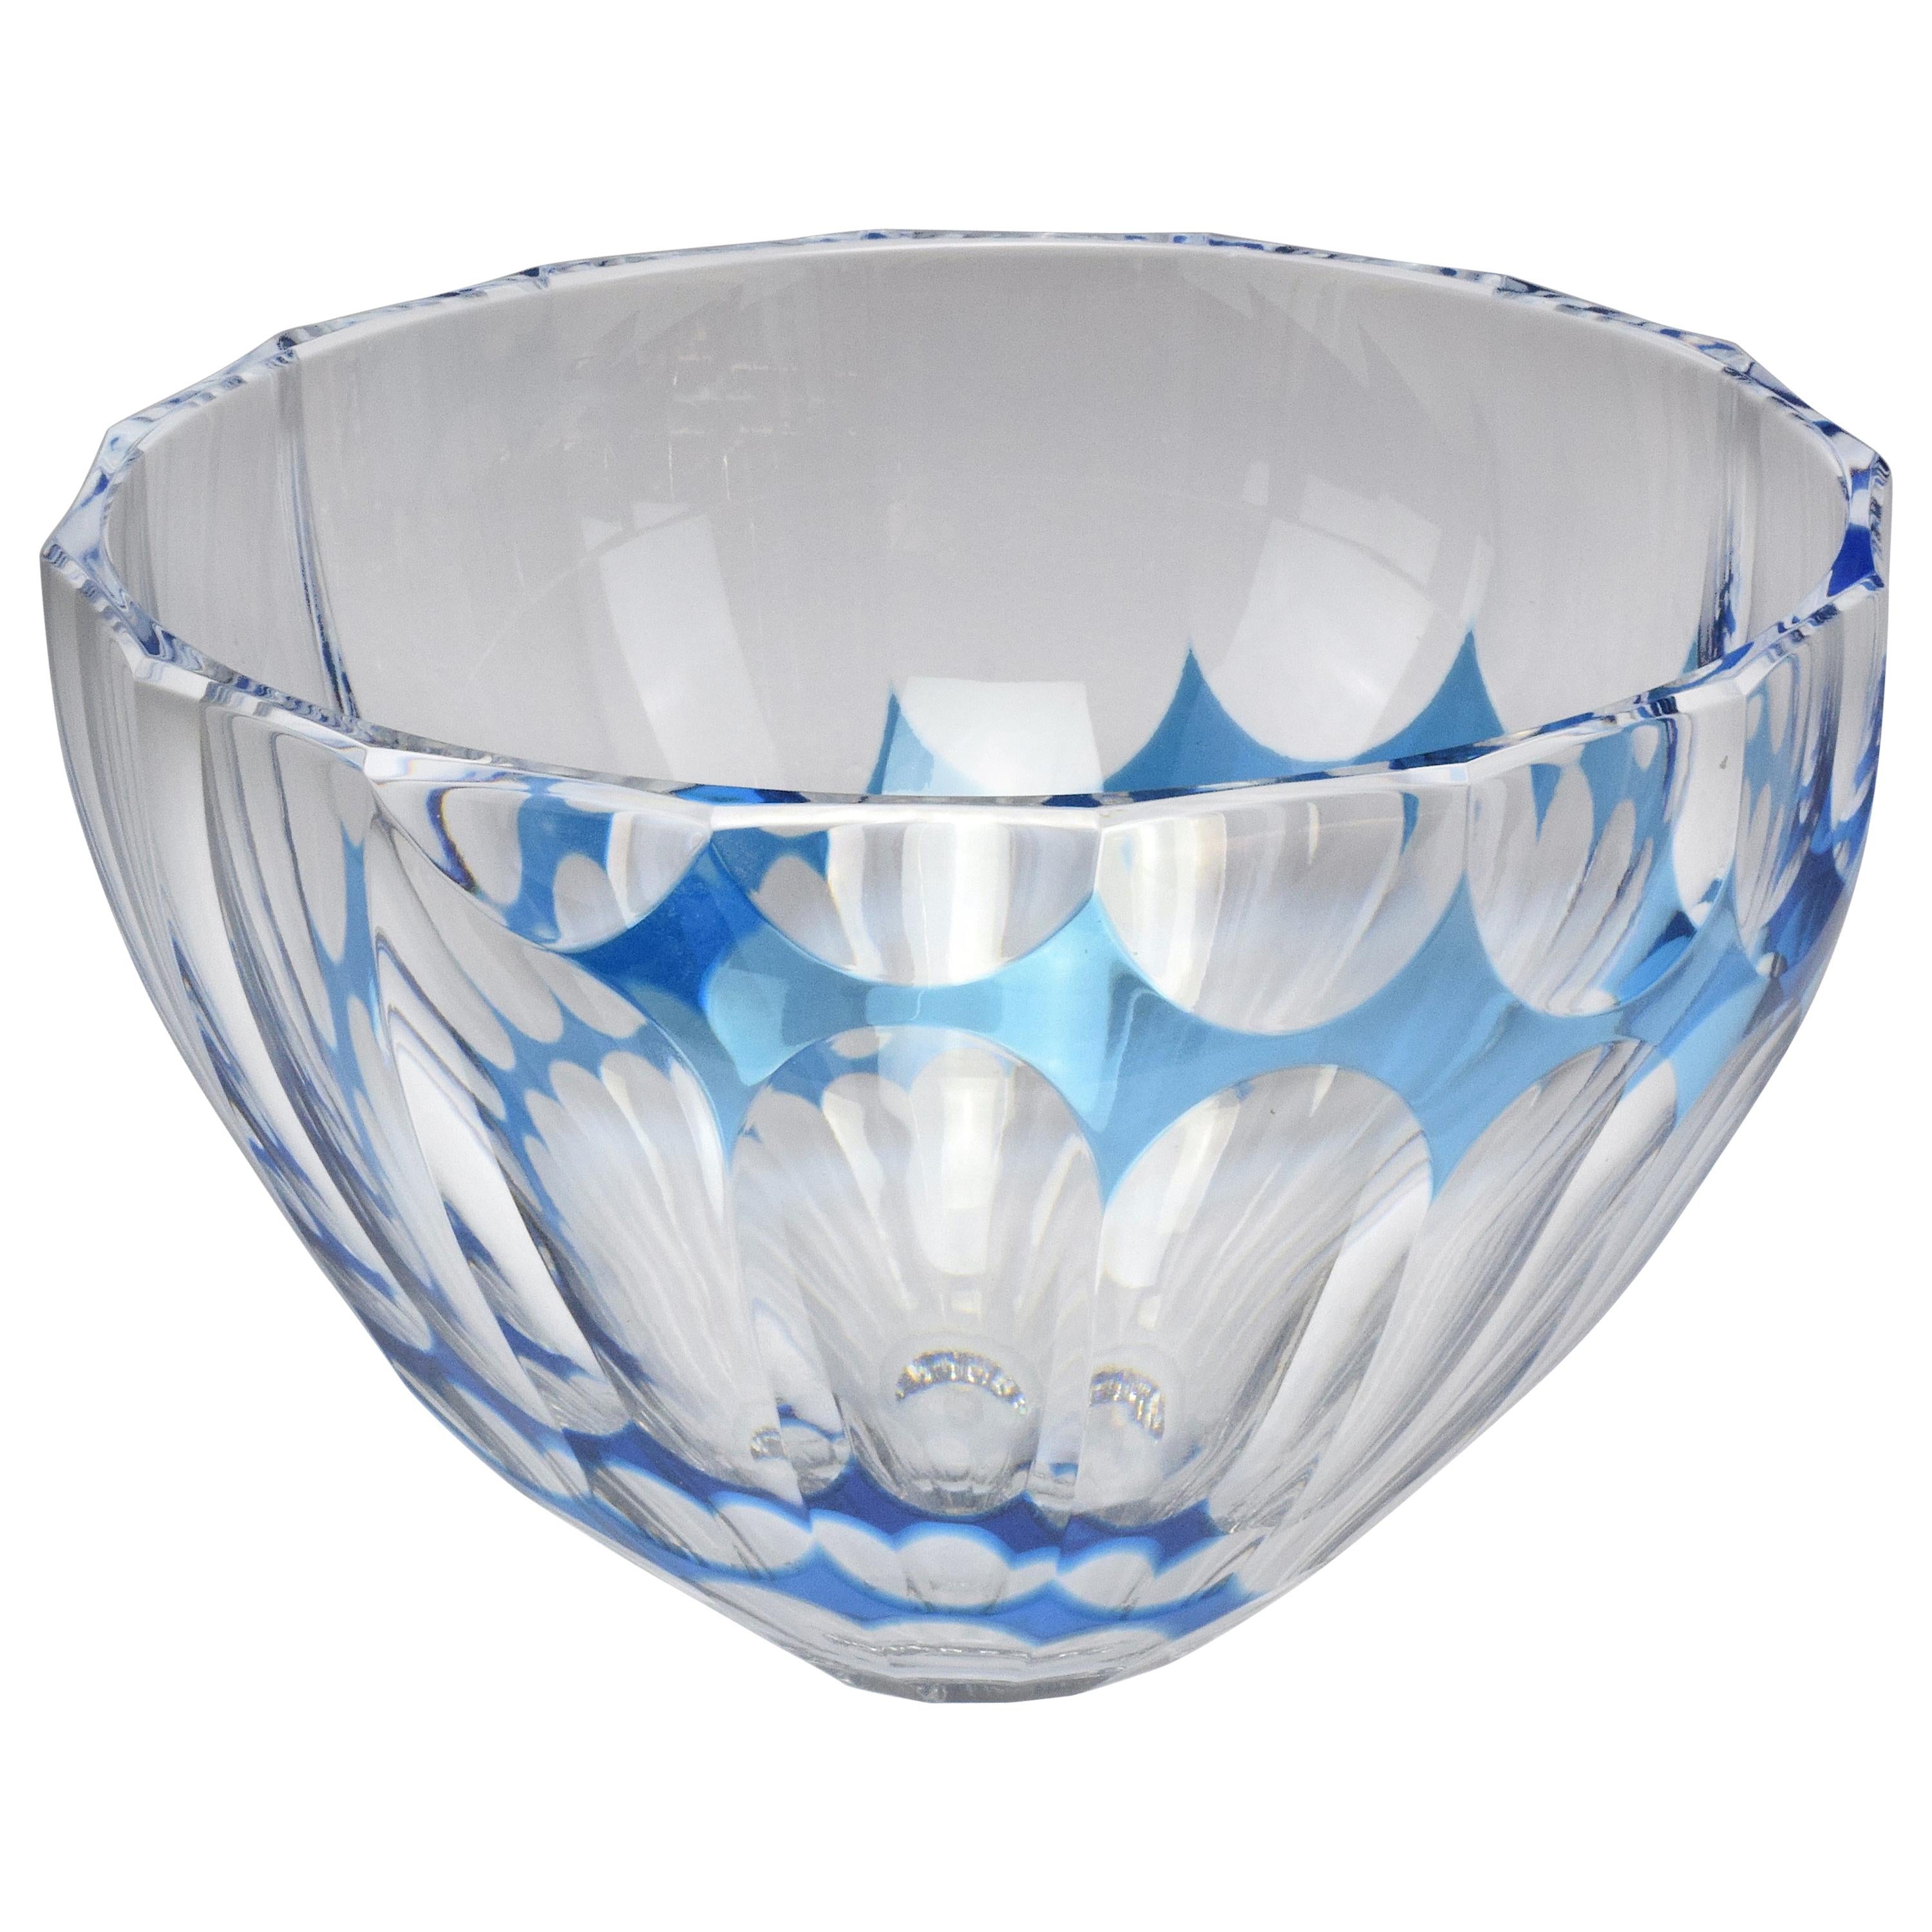 French Vintage Crystal Bowl or Centerpiece by Saint Louis, 1960-1970